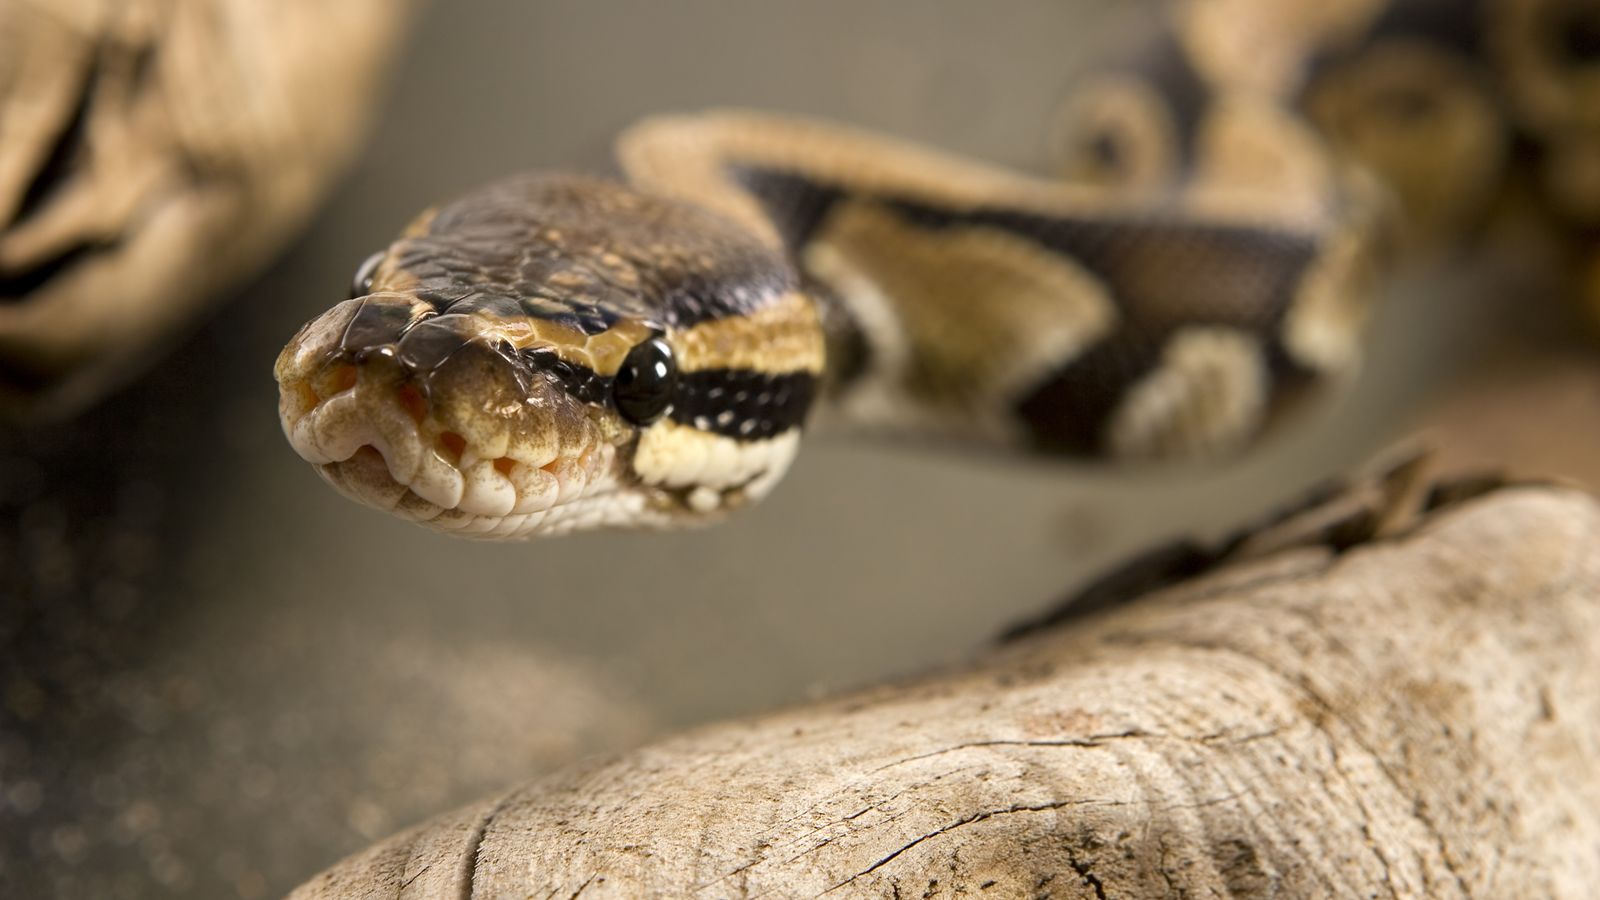 close up view of the face of a ball python